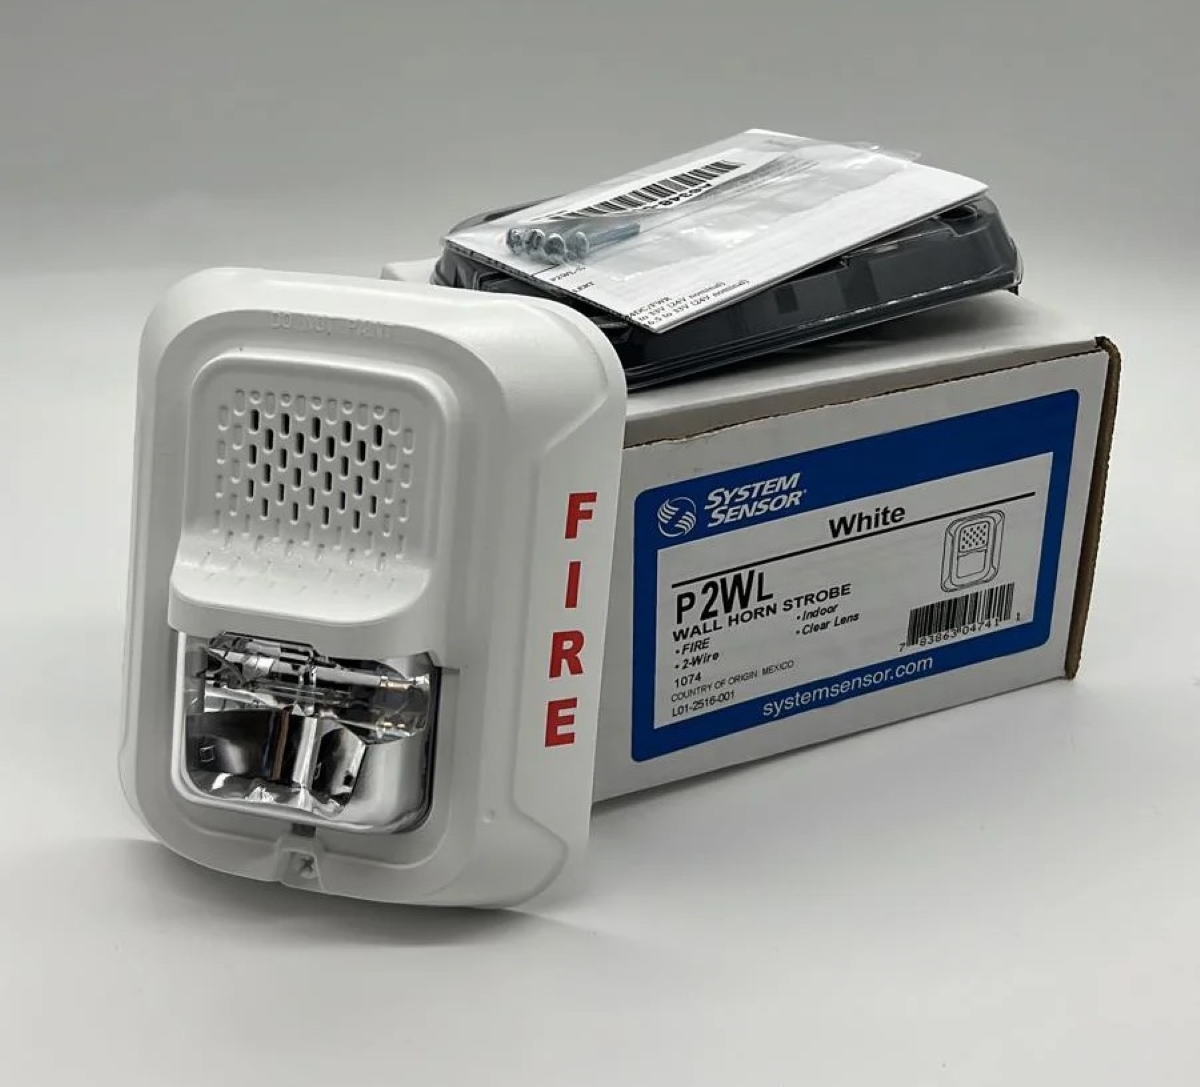 Fire alarm with strobe next to packaged box.